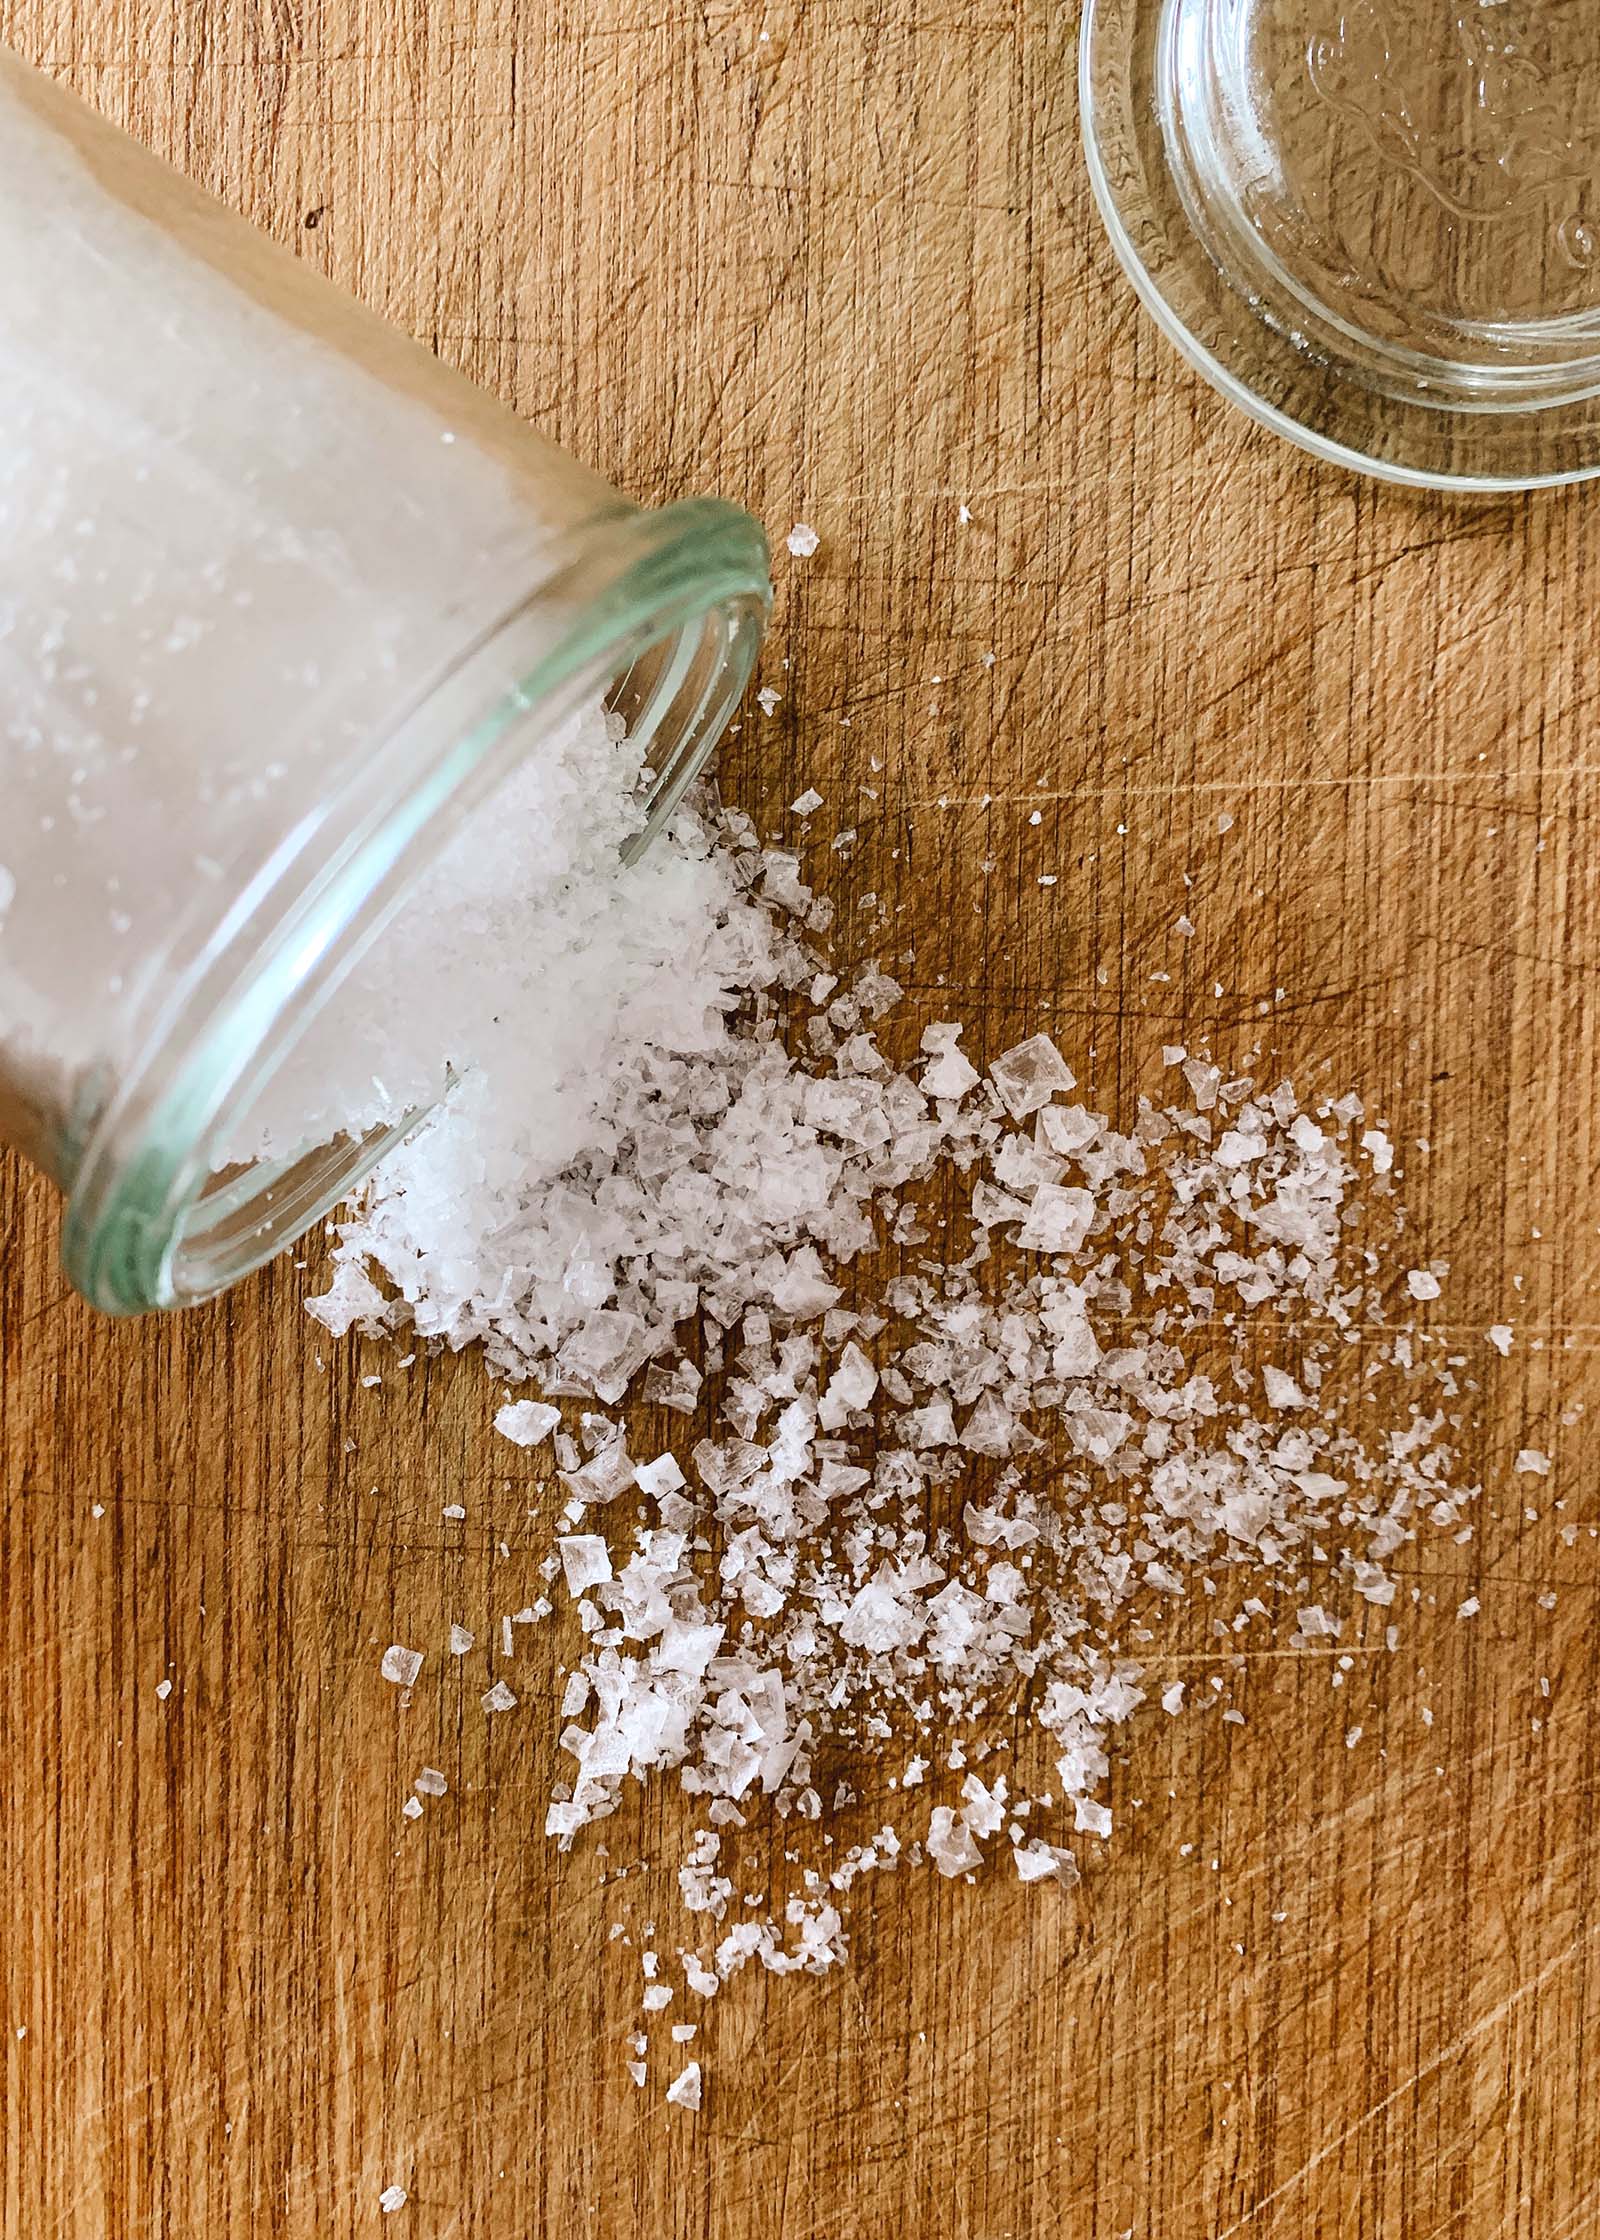 What are sea salt flakes? Maldon sea salt spilled from a jar on a counter.